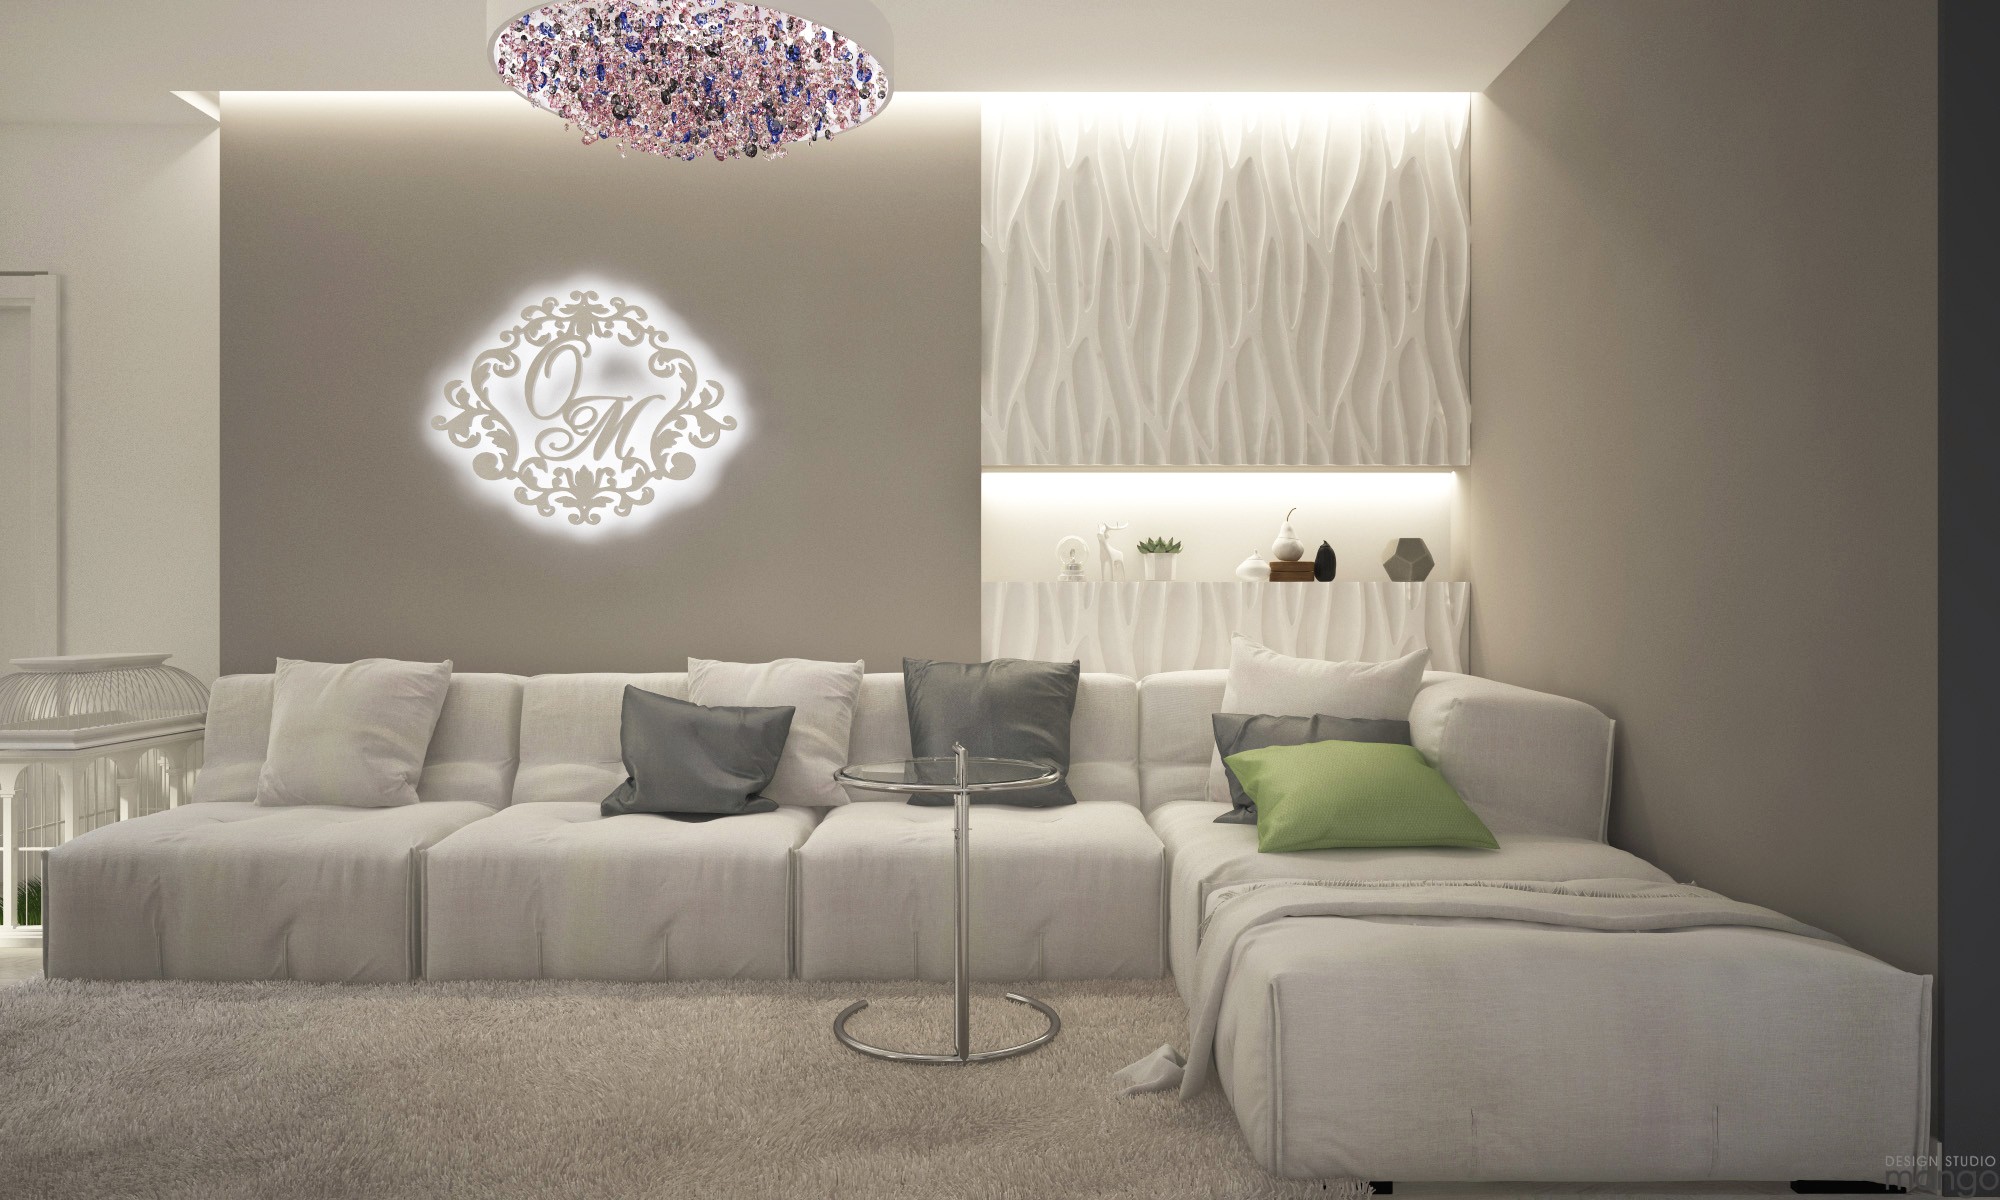 white luxury living room "width =" 2000 "height =" 1200 "srcset =" https://mileray.com/wp-content/uploads/2020/05/1588515612_670_Creative-Ideas-To-Make-Luxury-Living-Room-Designs-More-Remarkable.jpg 2000w, https: // myfashionos .com / wp-content / uploads / 2016/11 / Design-Studio-Mango8-1-300x180.jpg 300w, https://mileray.com/wp-content/uploads/2016/11/Design-Studio- Mango8- 1-768x461.jpg 768w, https://mileray.com/wp-content/uploads/2016/11/Design-Studio-Mango8-1-1024x614.jpg 1024w, https://mileray.com/wp- content / uploads / 2016/11 / Design-Studio-Mango8-1-696x418.jpg 696w, https://mileray.com/wp-content/uploads/2016/11/Design-Studio-Mango8-1-1068x641.jpg 1068w, https://mileray.com/wp-content/uploads/2016/11/Design-Studio-Mango8-1-700x420.jpg 700w "sizes =" (maximum width: 2000px) 100vw, 2000px